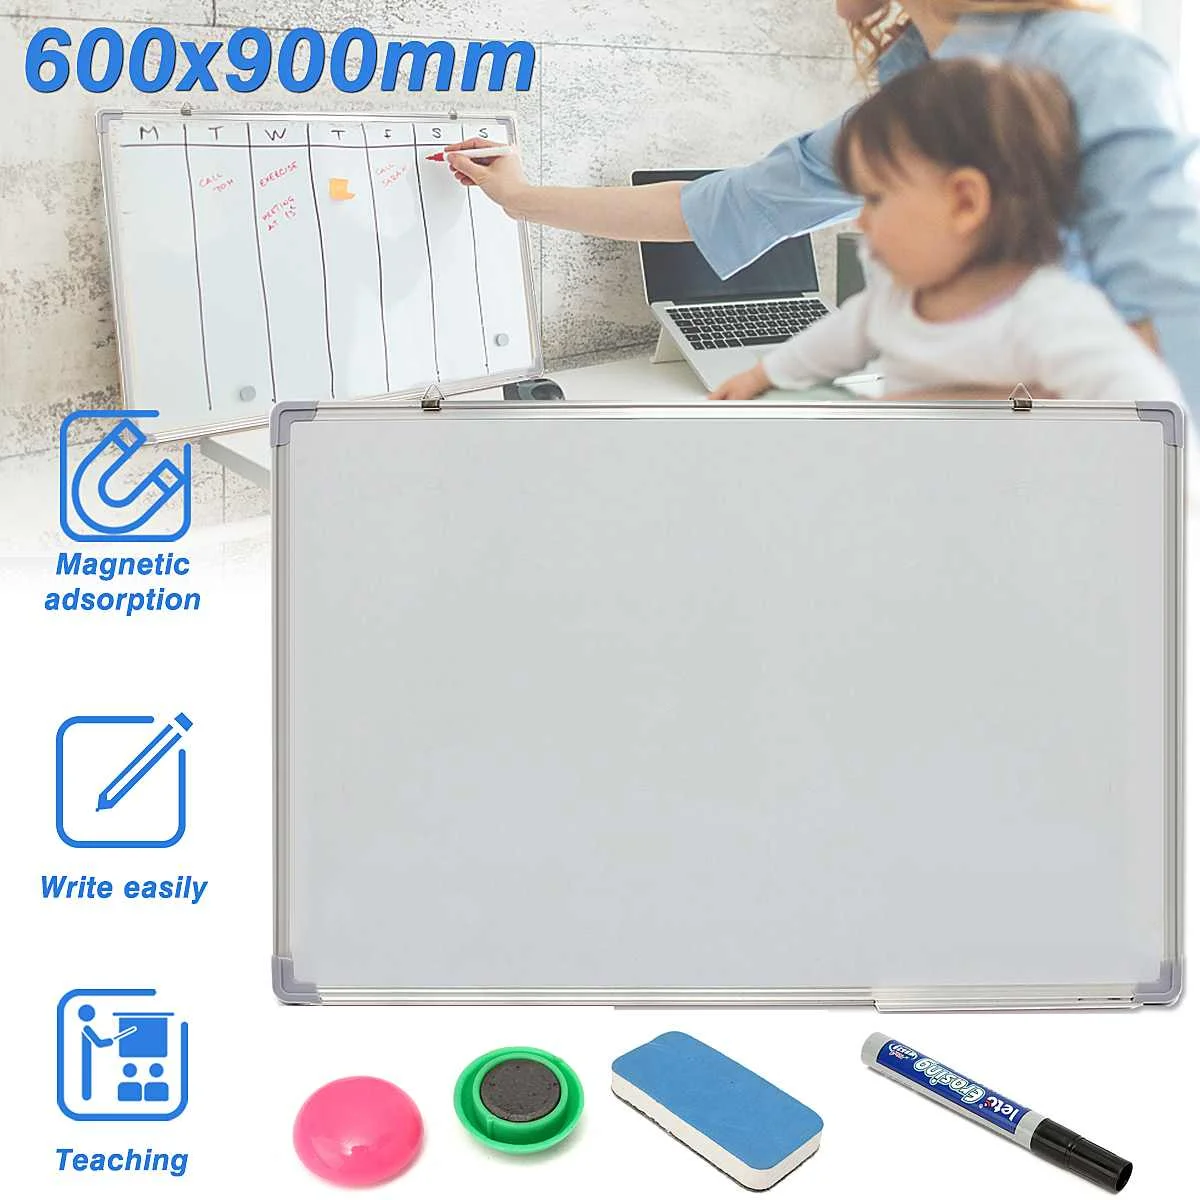 KICUTE 600x900MM Magnetic Whiteboard Writing Board Double Side With Pen Erase Magnets Buttons For Office School